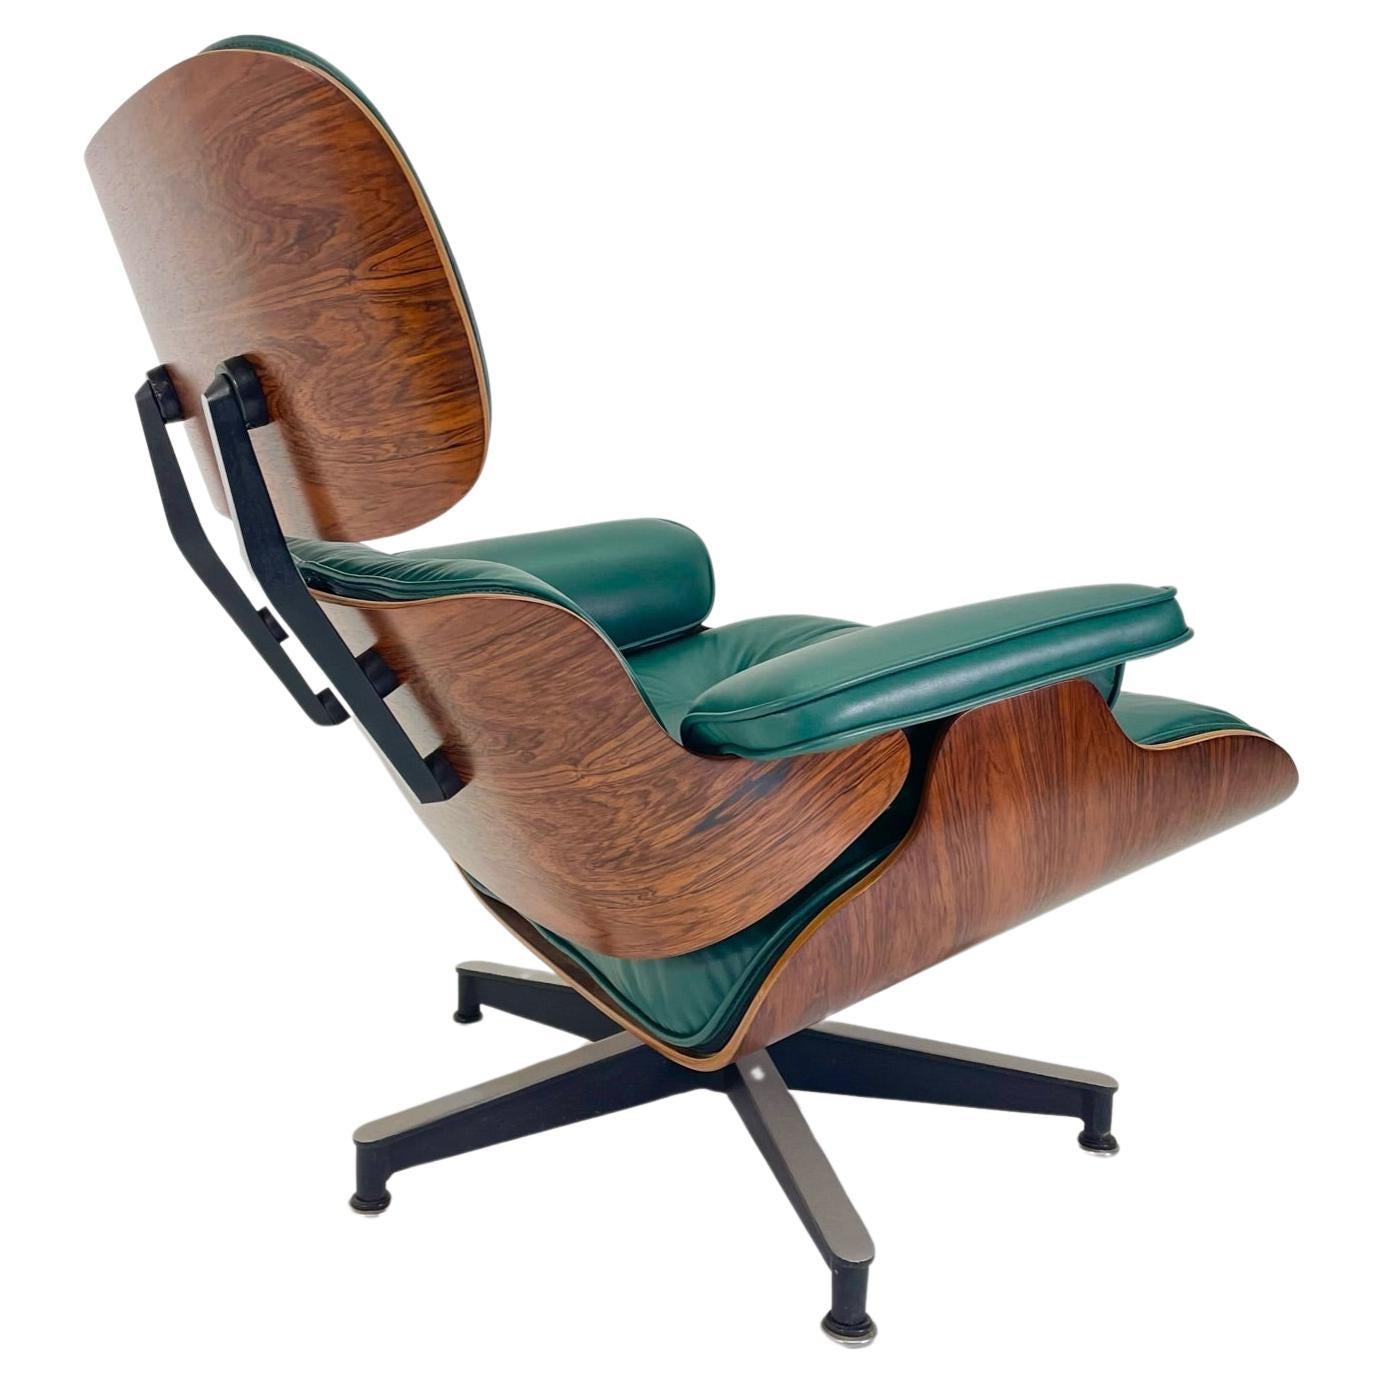 Just arrived! This incredible chair has been restored with refinished rosewood shells, new shock mounts, and brand new hunter green leather and down filled cushions. We love how the hunter green cushions make the deep rich rosewood pop. This is a